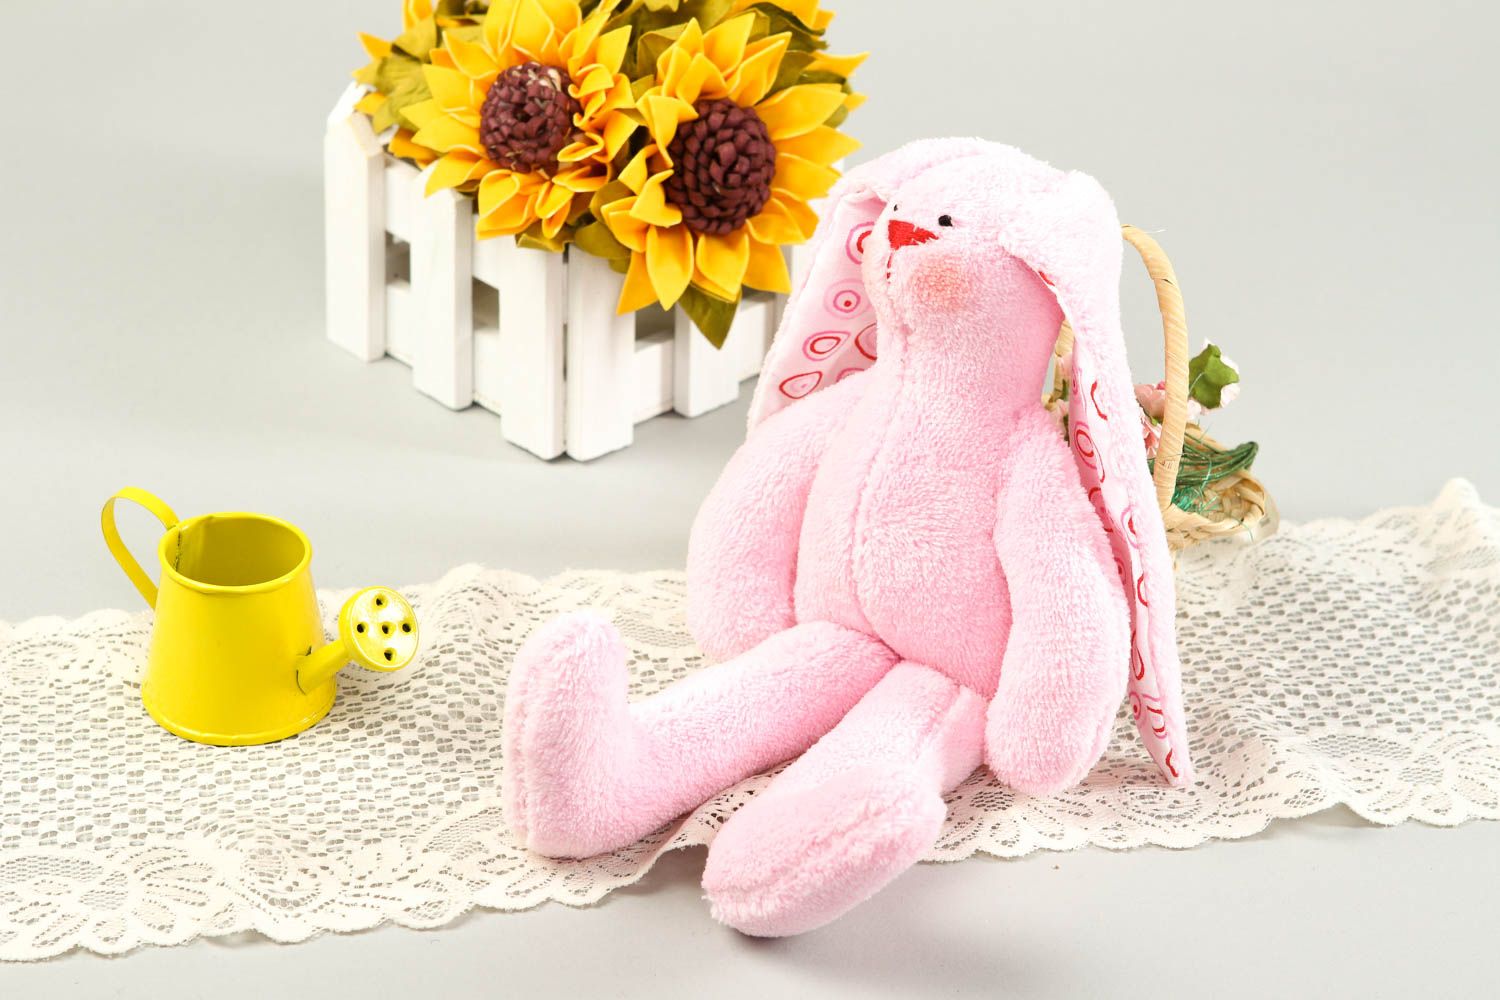 Handmade soft toy toddle toys stuffed animals nursery decor gifts for kids photo 1